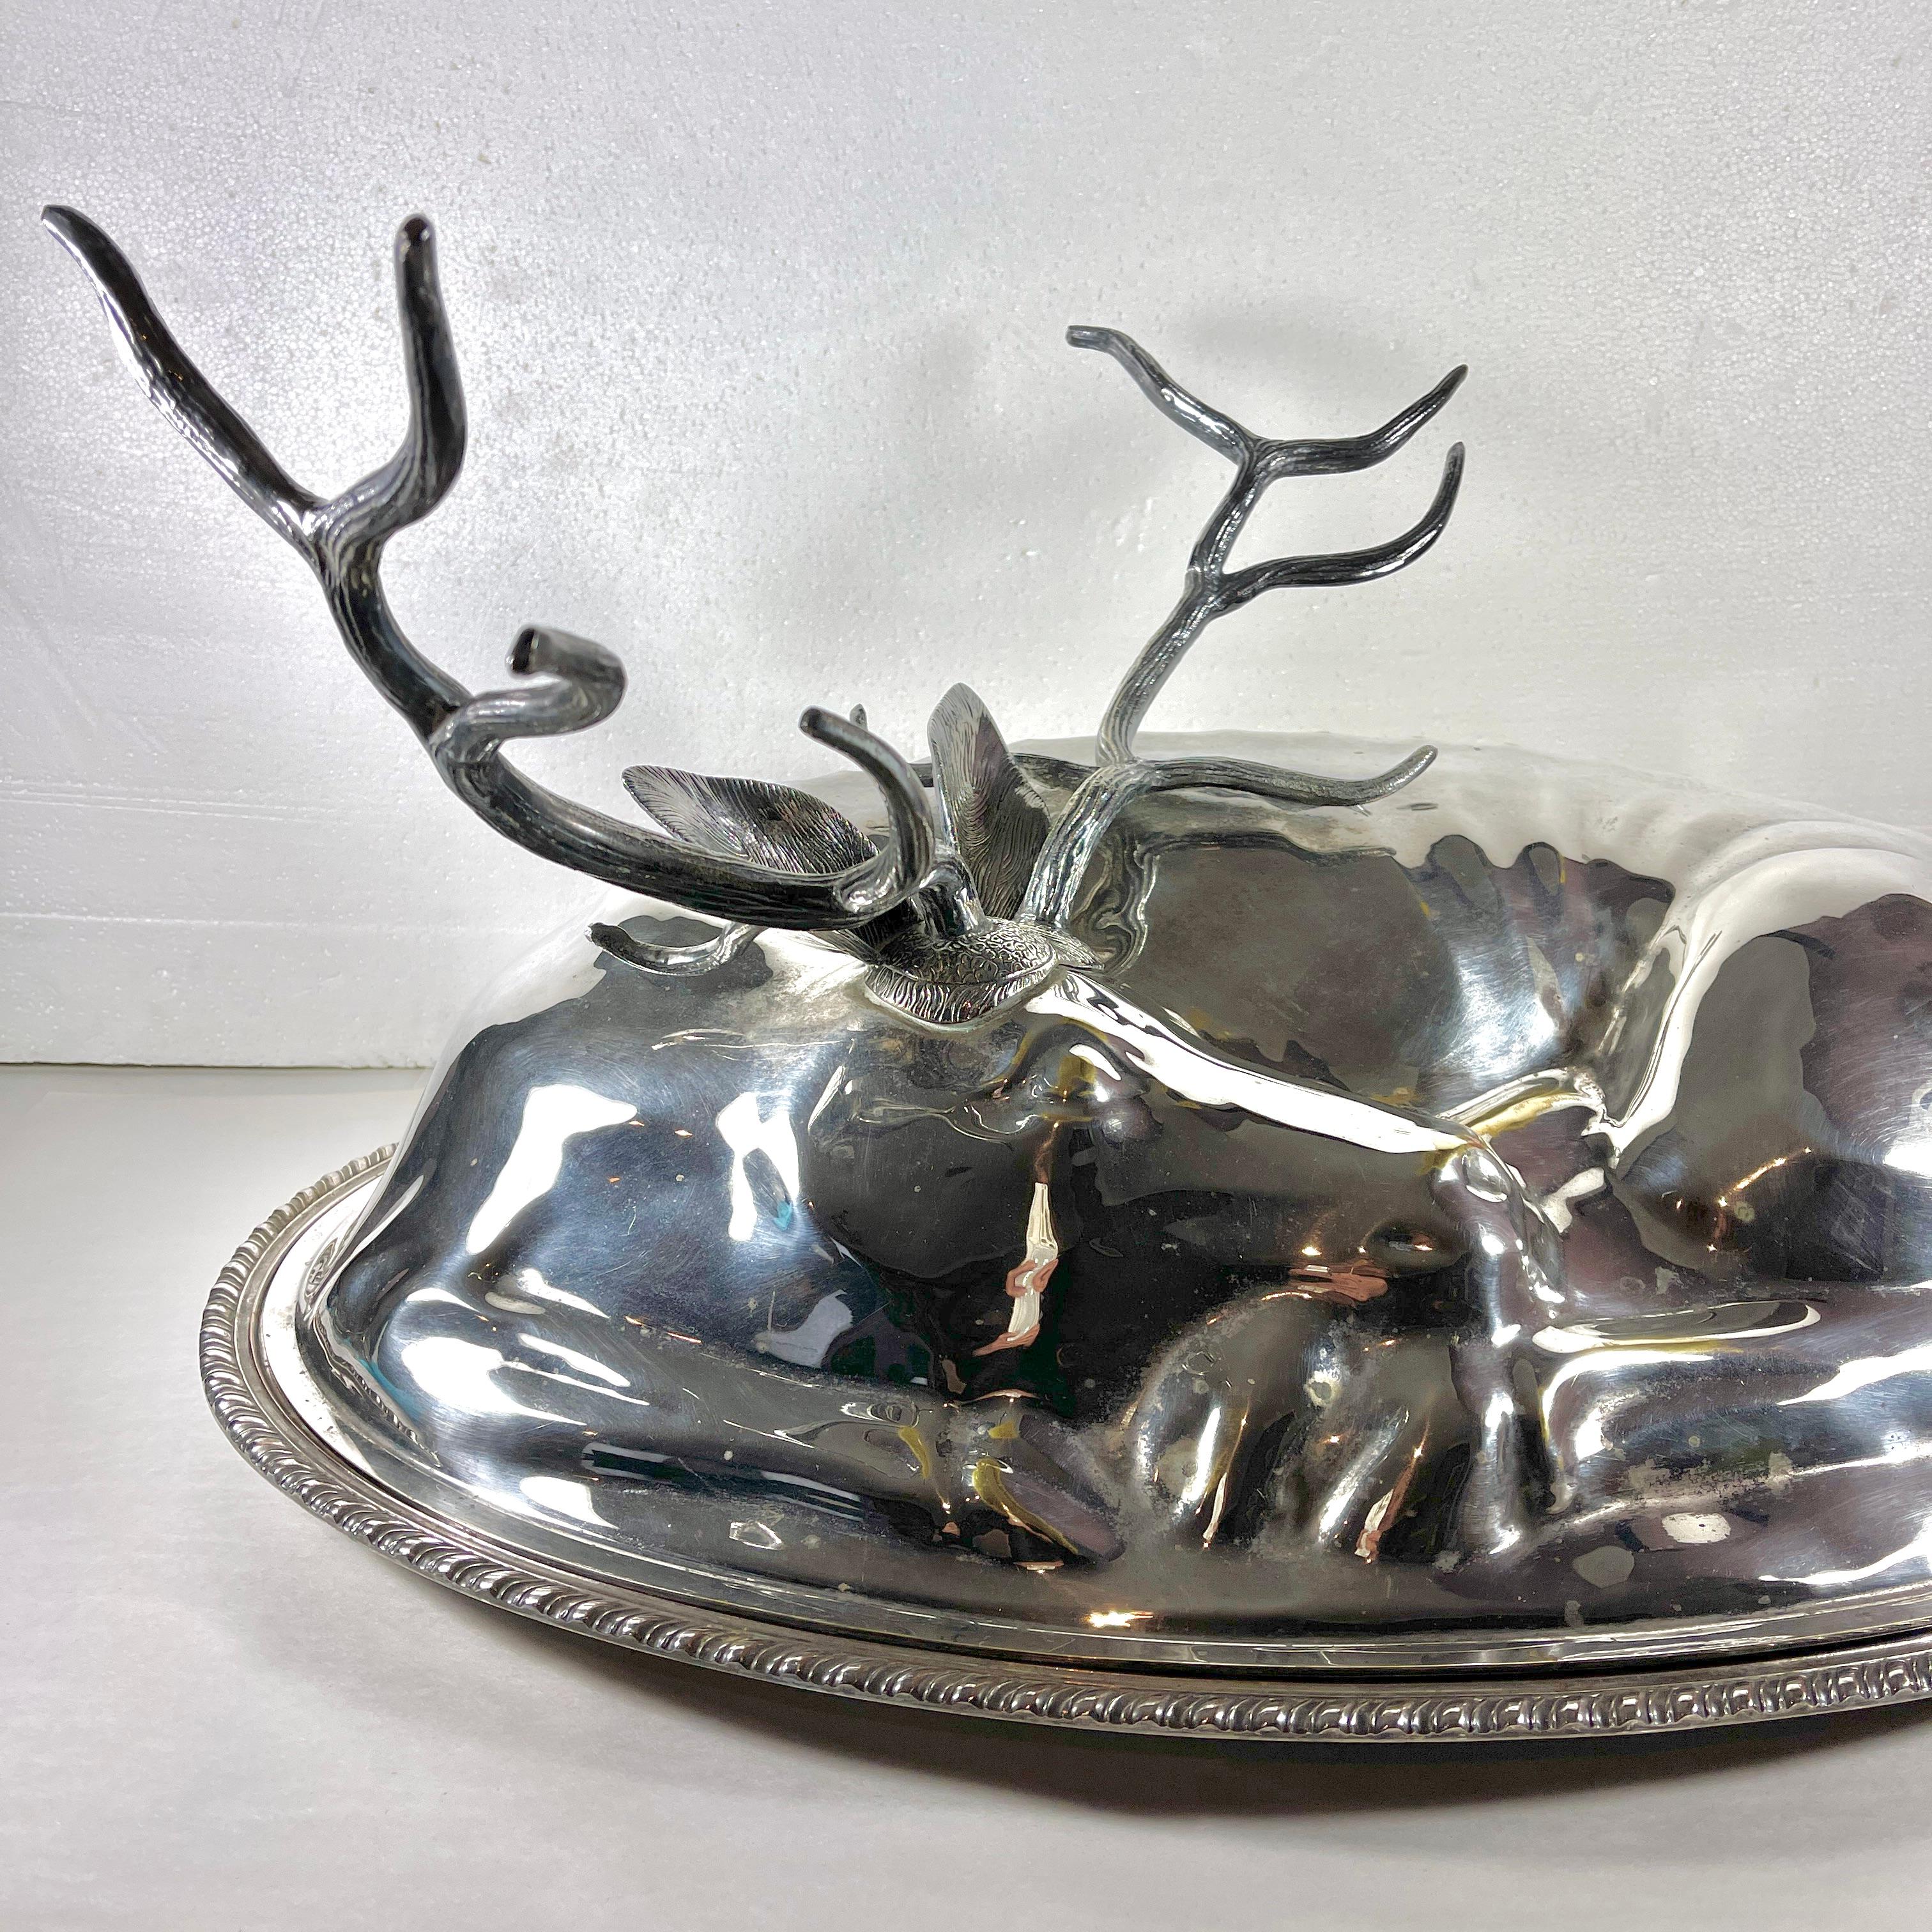 Teghini Firenze Italian Silver Resting Deer Monumental Covered Serving Platter In Good Condition For Sale In Philadelphia, PA